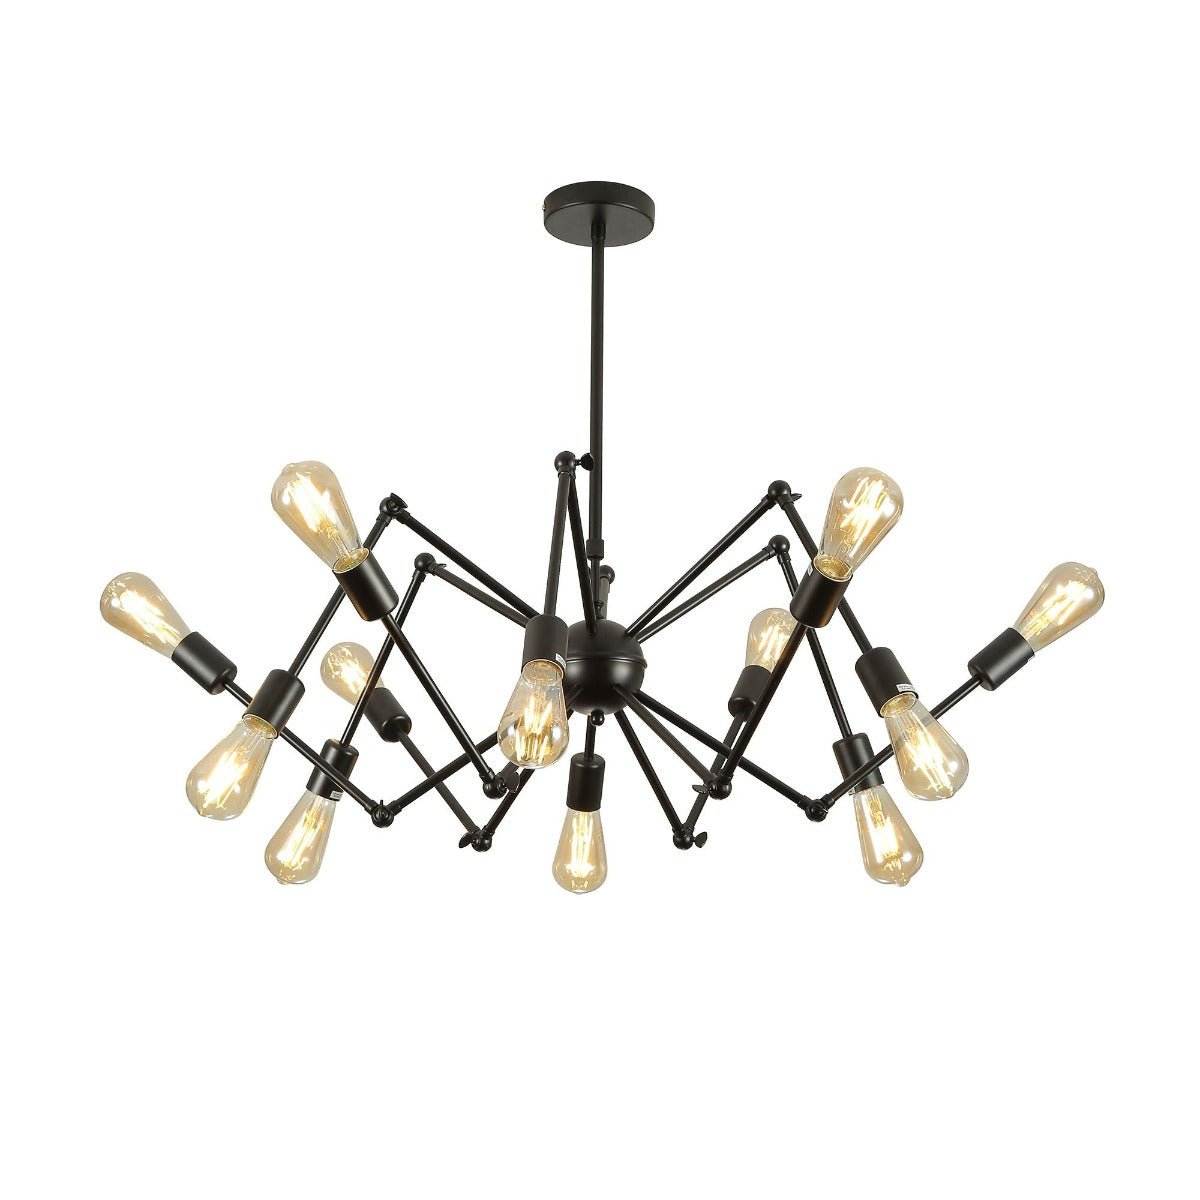 Black hinged rod metal spider chandelier with 12xe27 fitting in indoor setting 158-17586